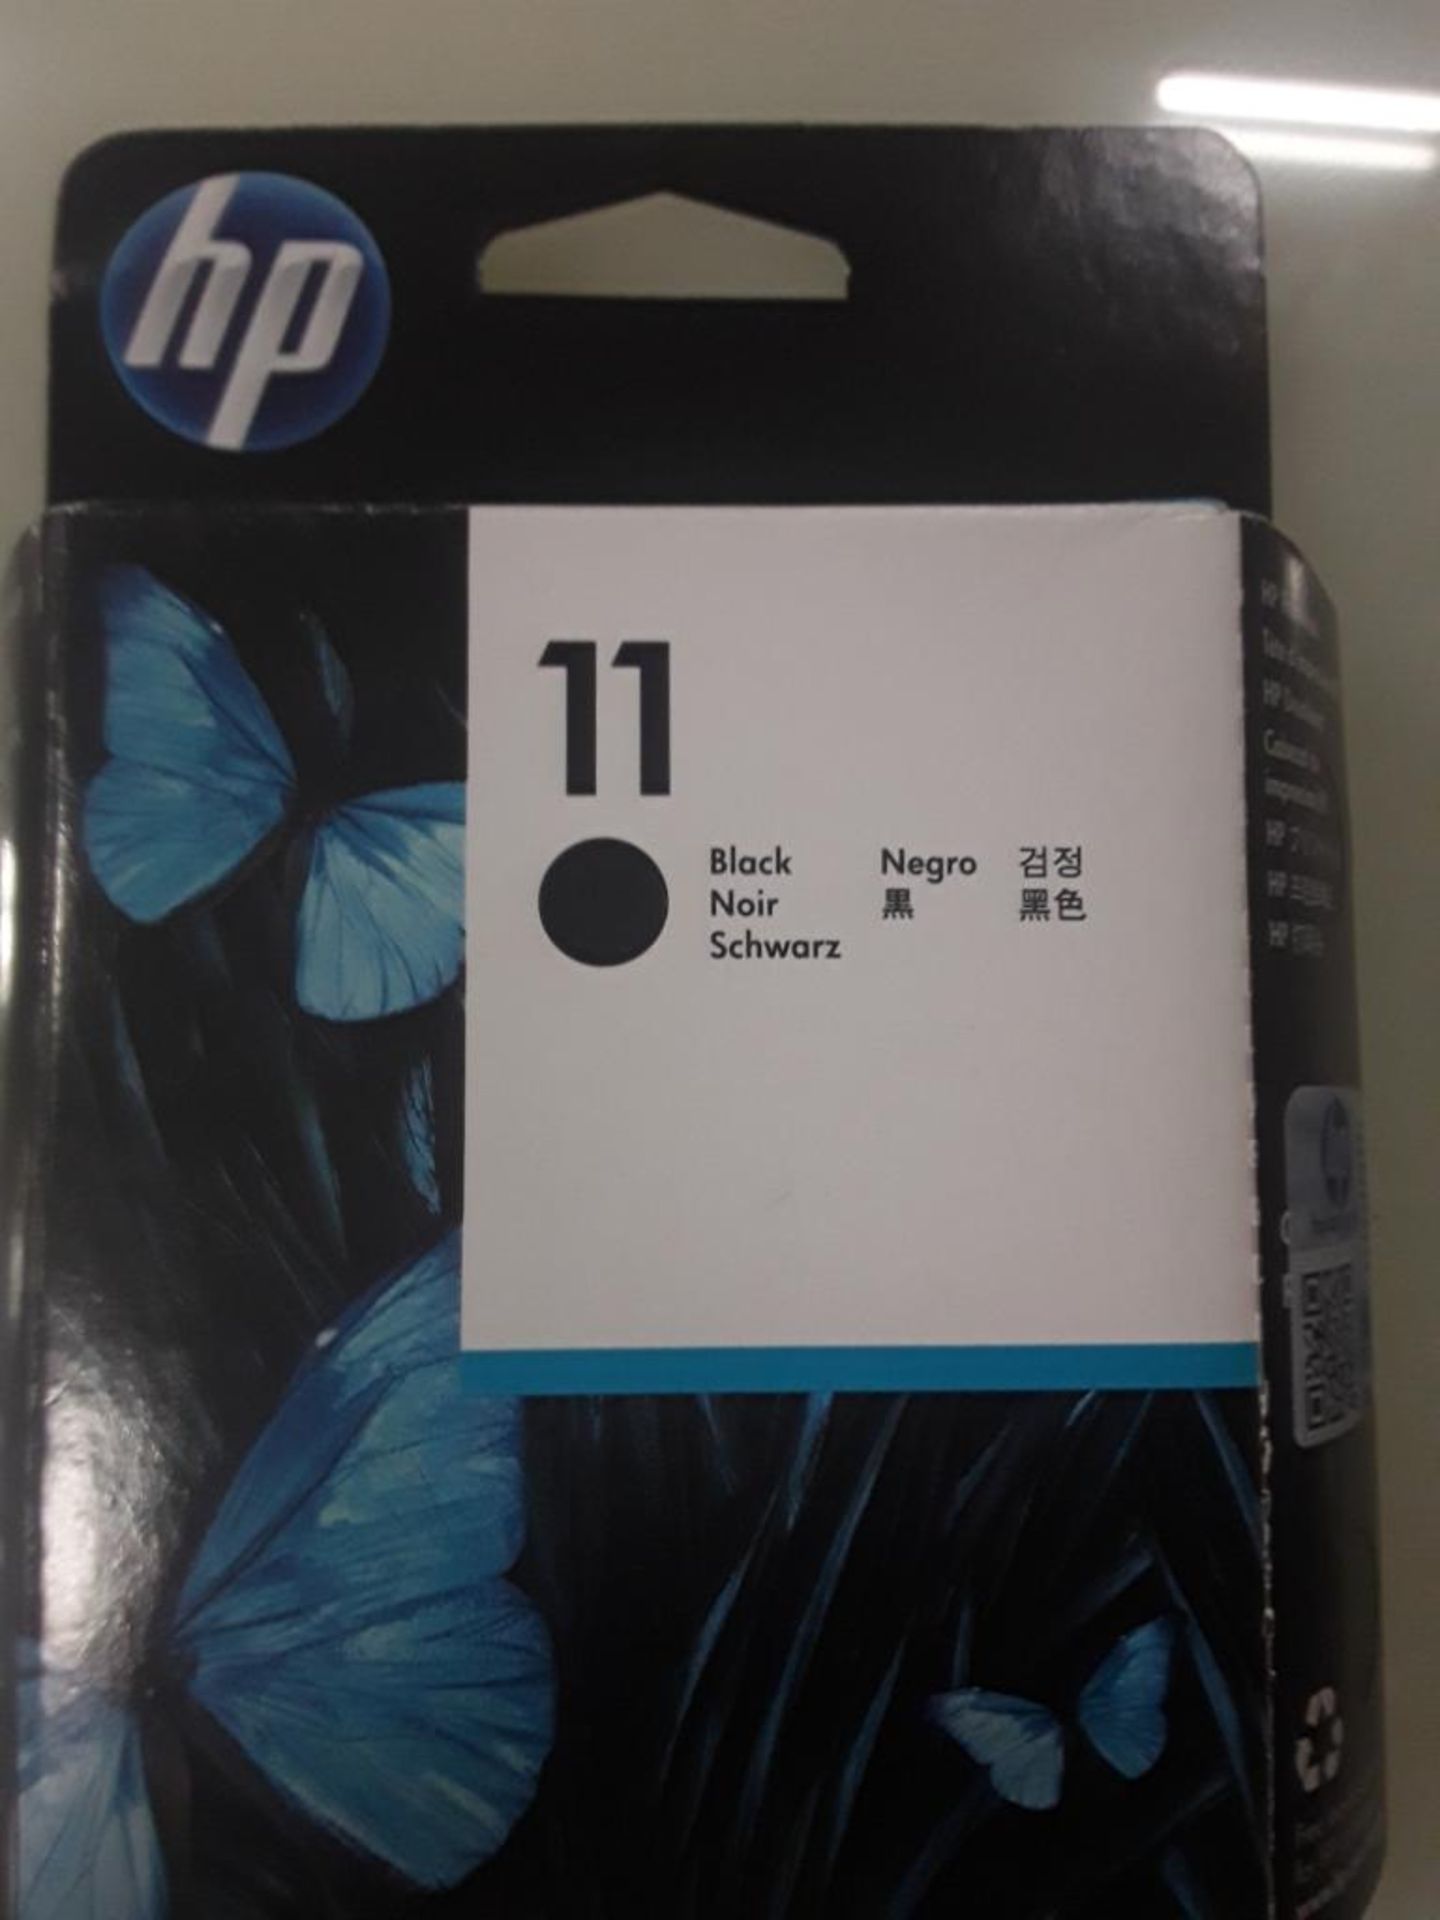 miscellaneous HP Cartridges - Image 10 of 10